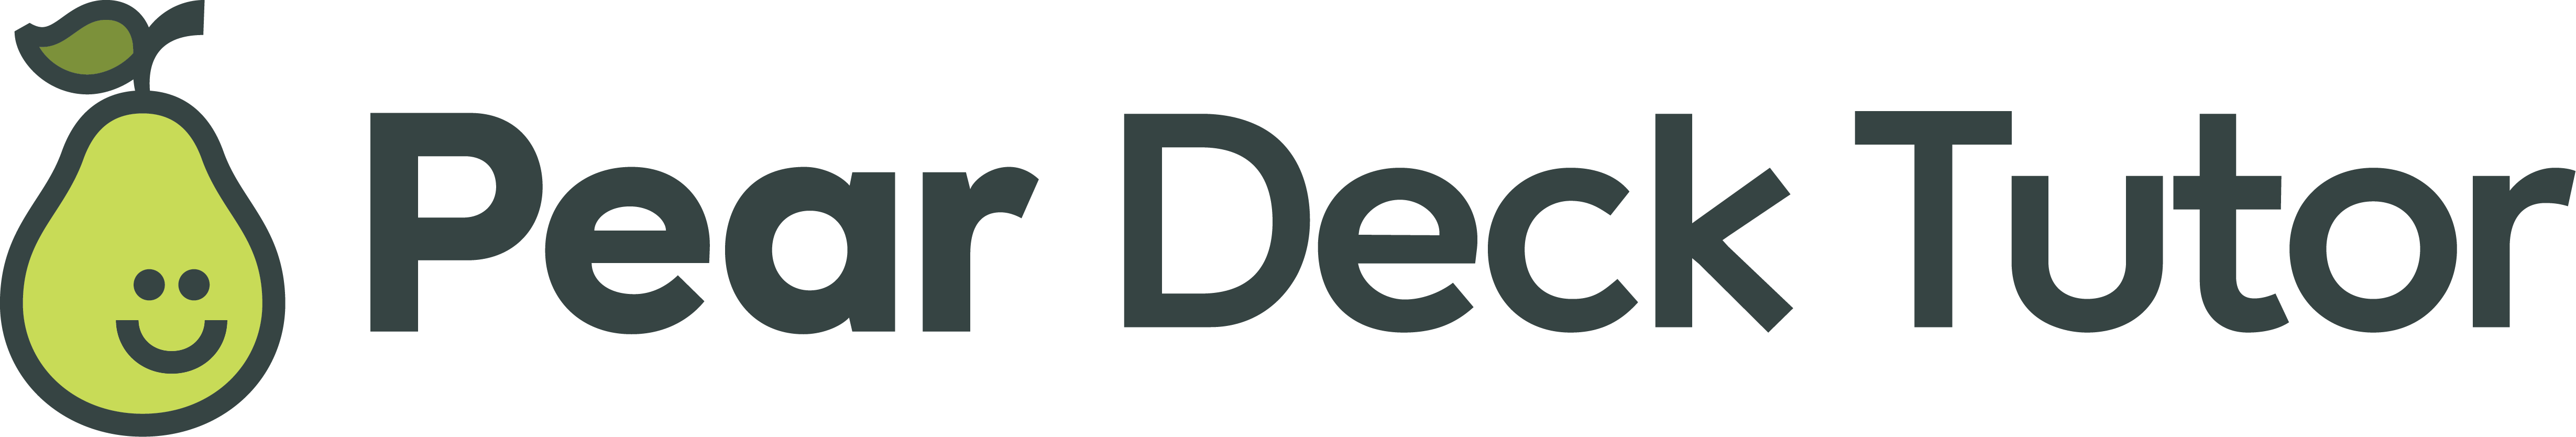 Pear-Deck-Tutor-Logo-MultiColor---.png-Formerly-TutorMe.png